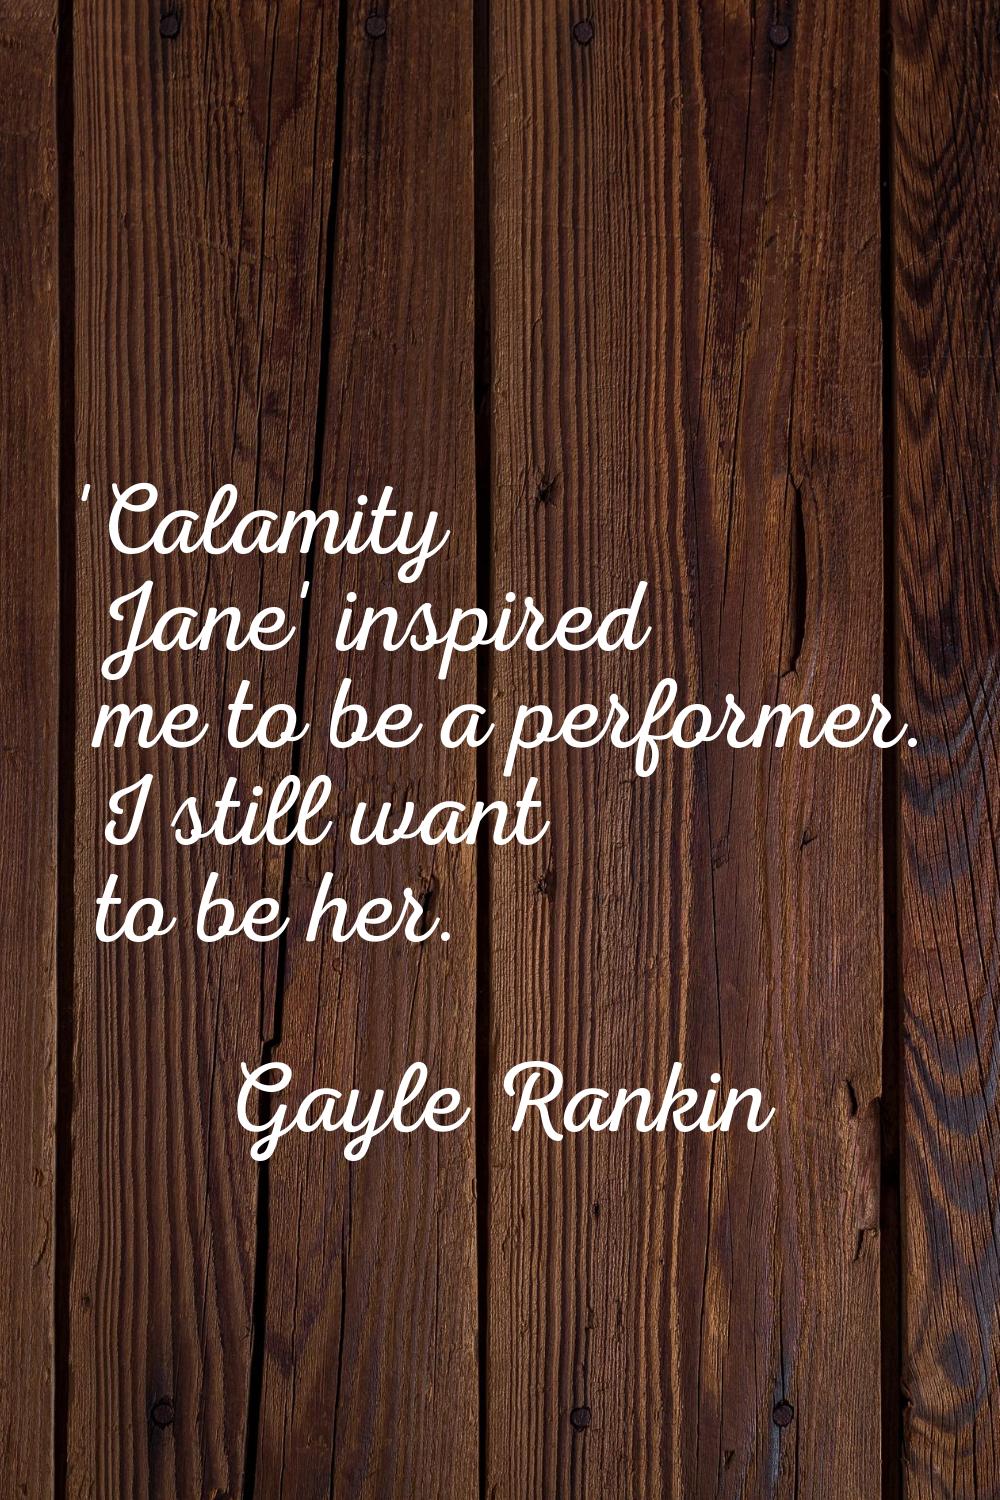 'Calamity Jane' inspired me to be a performer. I still want to be her.